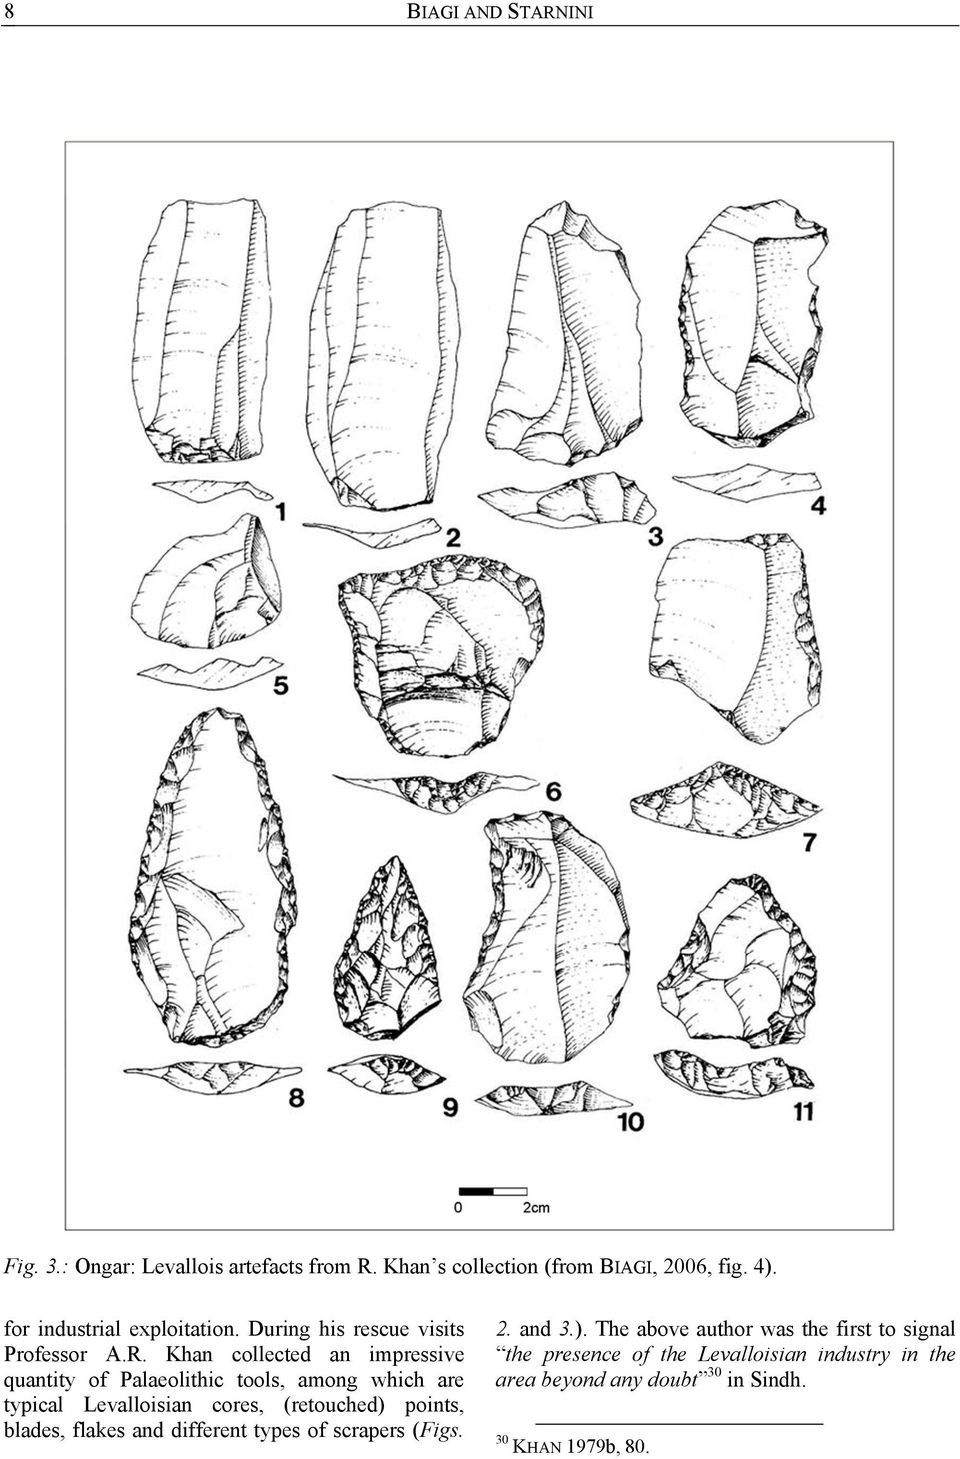 Khan collected an impressive quantity of Palaeolithic tools, among which are typical Levalloisian cores, (retouched) points,